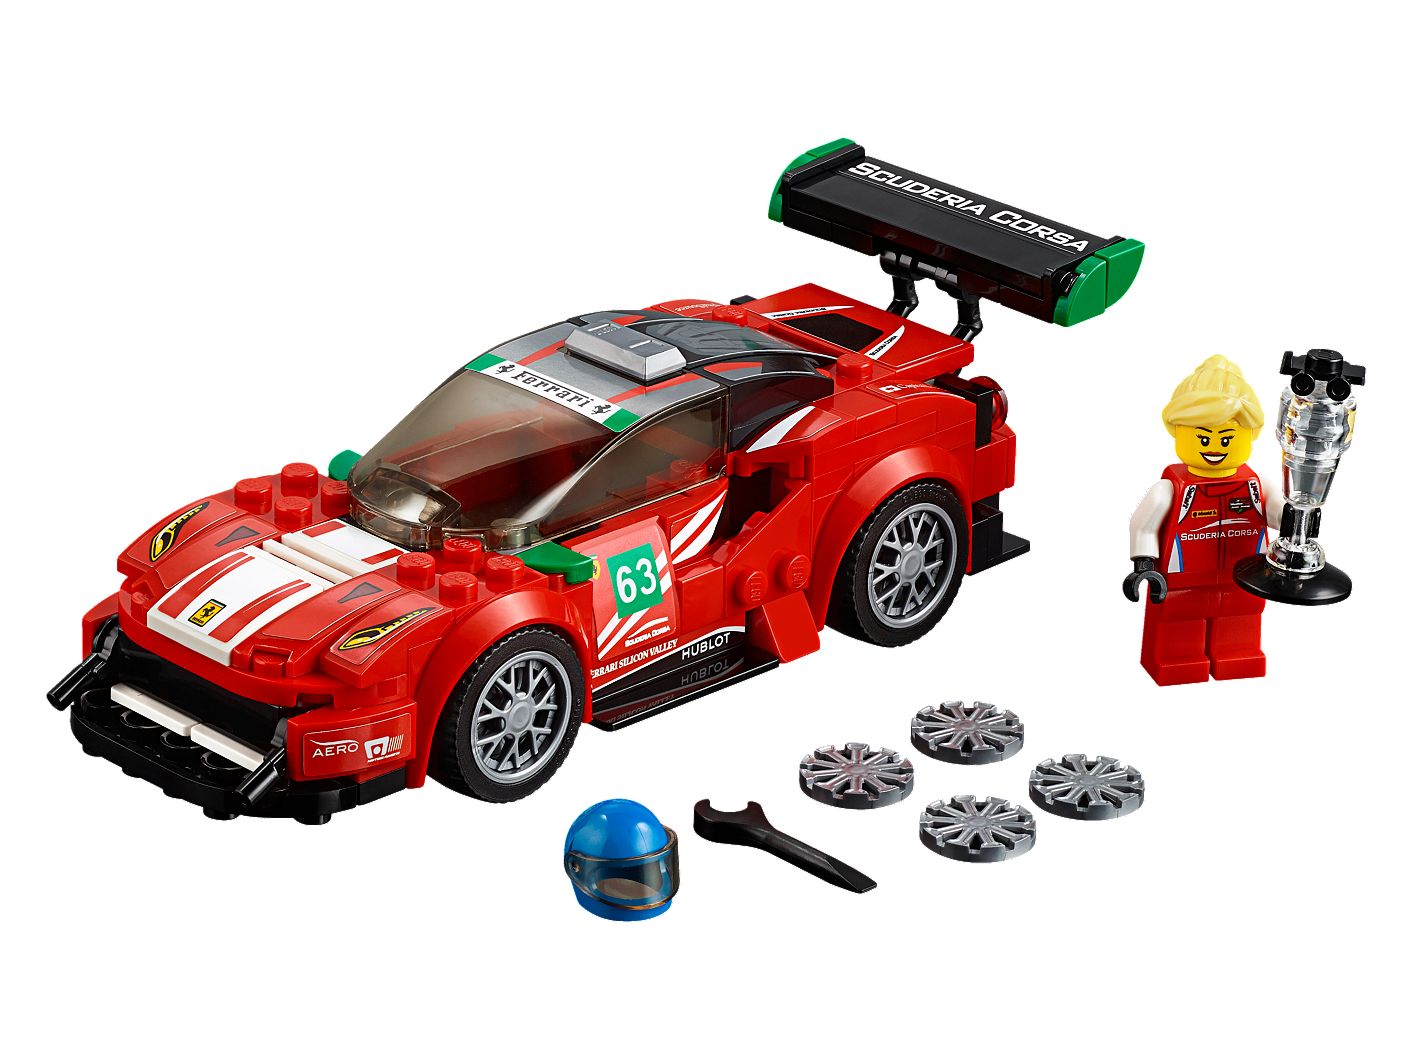 Ferrari 488 Gt3 Scuderia Corsa 75886 Speed Champions Buy Online At The Official Lego Shop Us